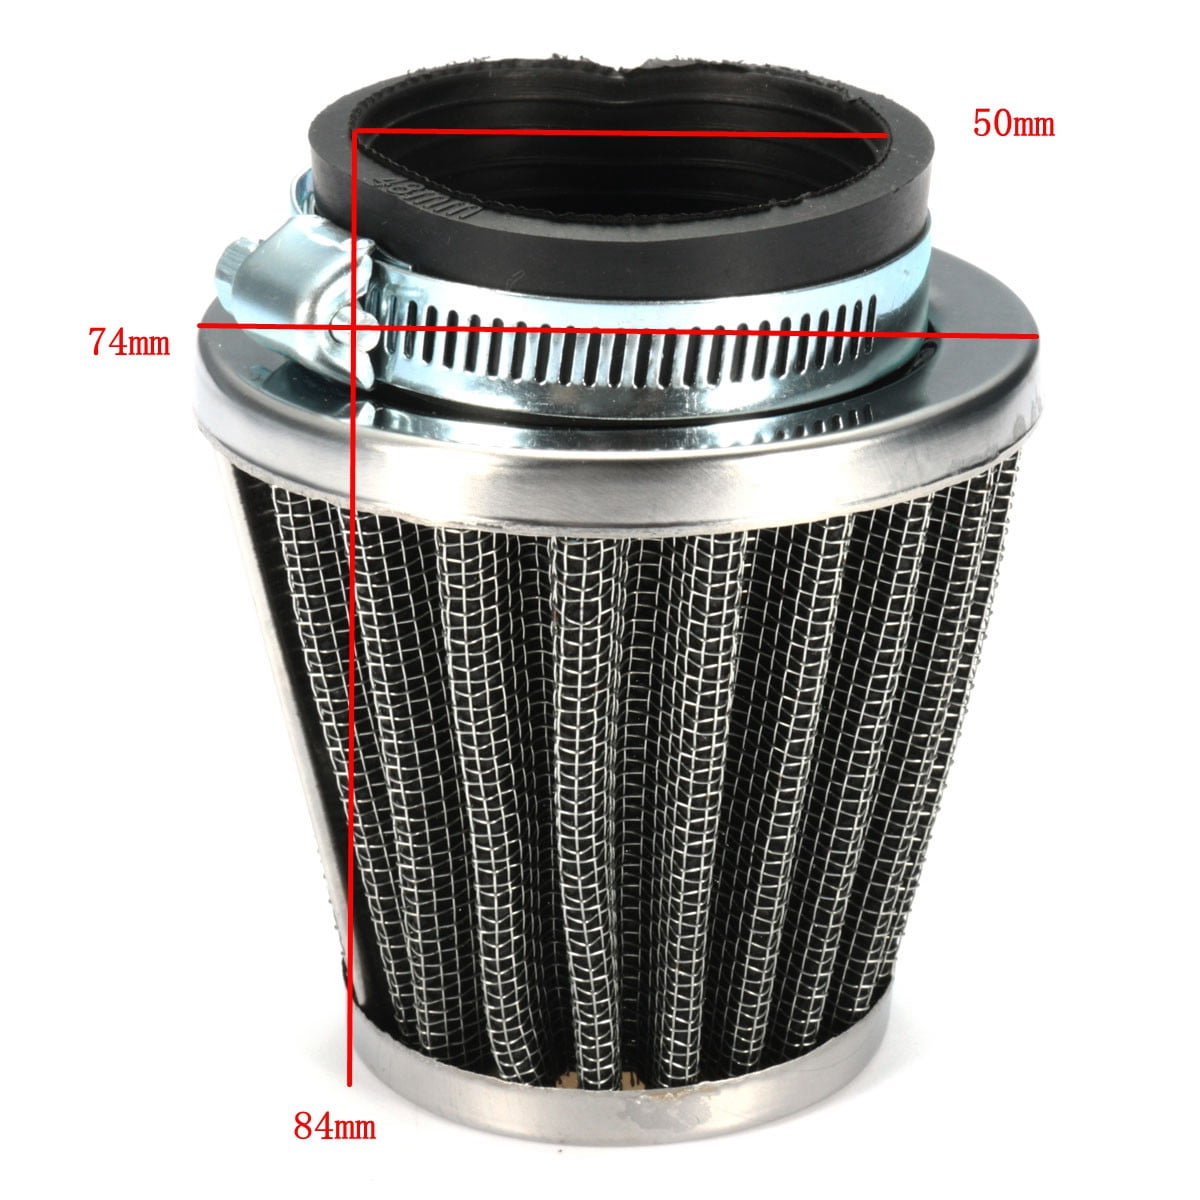 1x 42mm Motorcycle Quad Air Filter Engine Inlet Intake Air Vent Cone Cleaner Pod